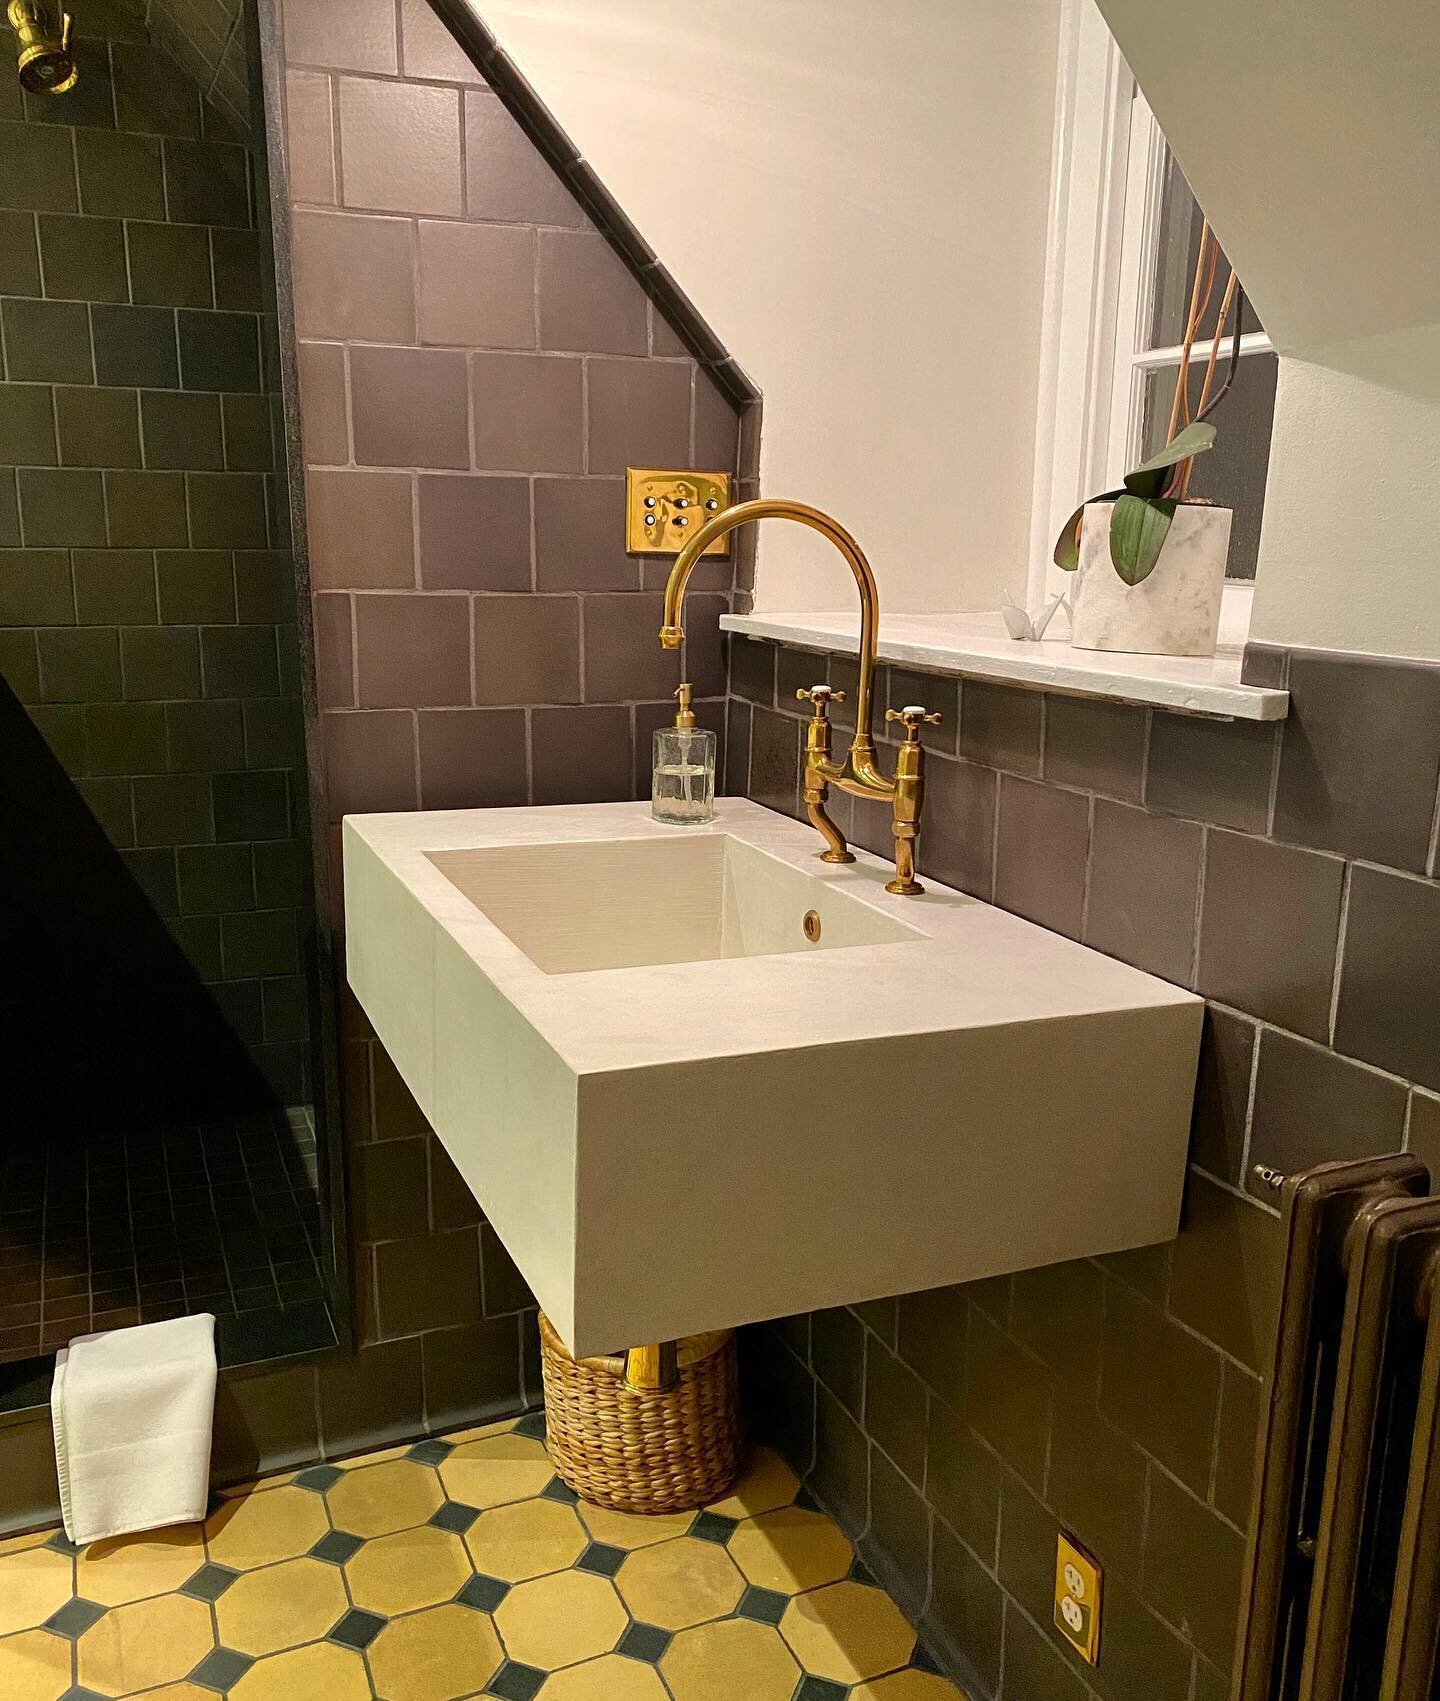 Thank you Audrey at #keseinteriors for including us in this project-love the way this turned out! #customsink #concretesink #concretebasin #concretetrough #modernsink #farmsink #concretevanity #concretebathroom #bathroomdesign #concretedesign #stogsc